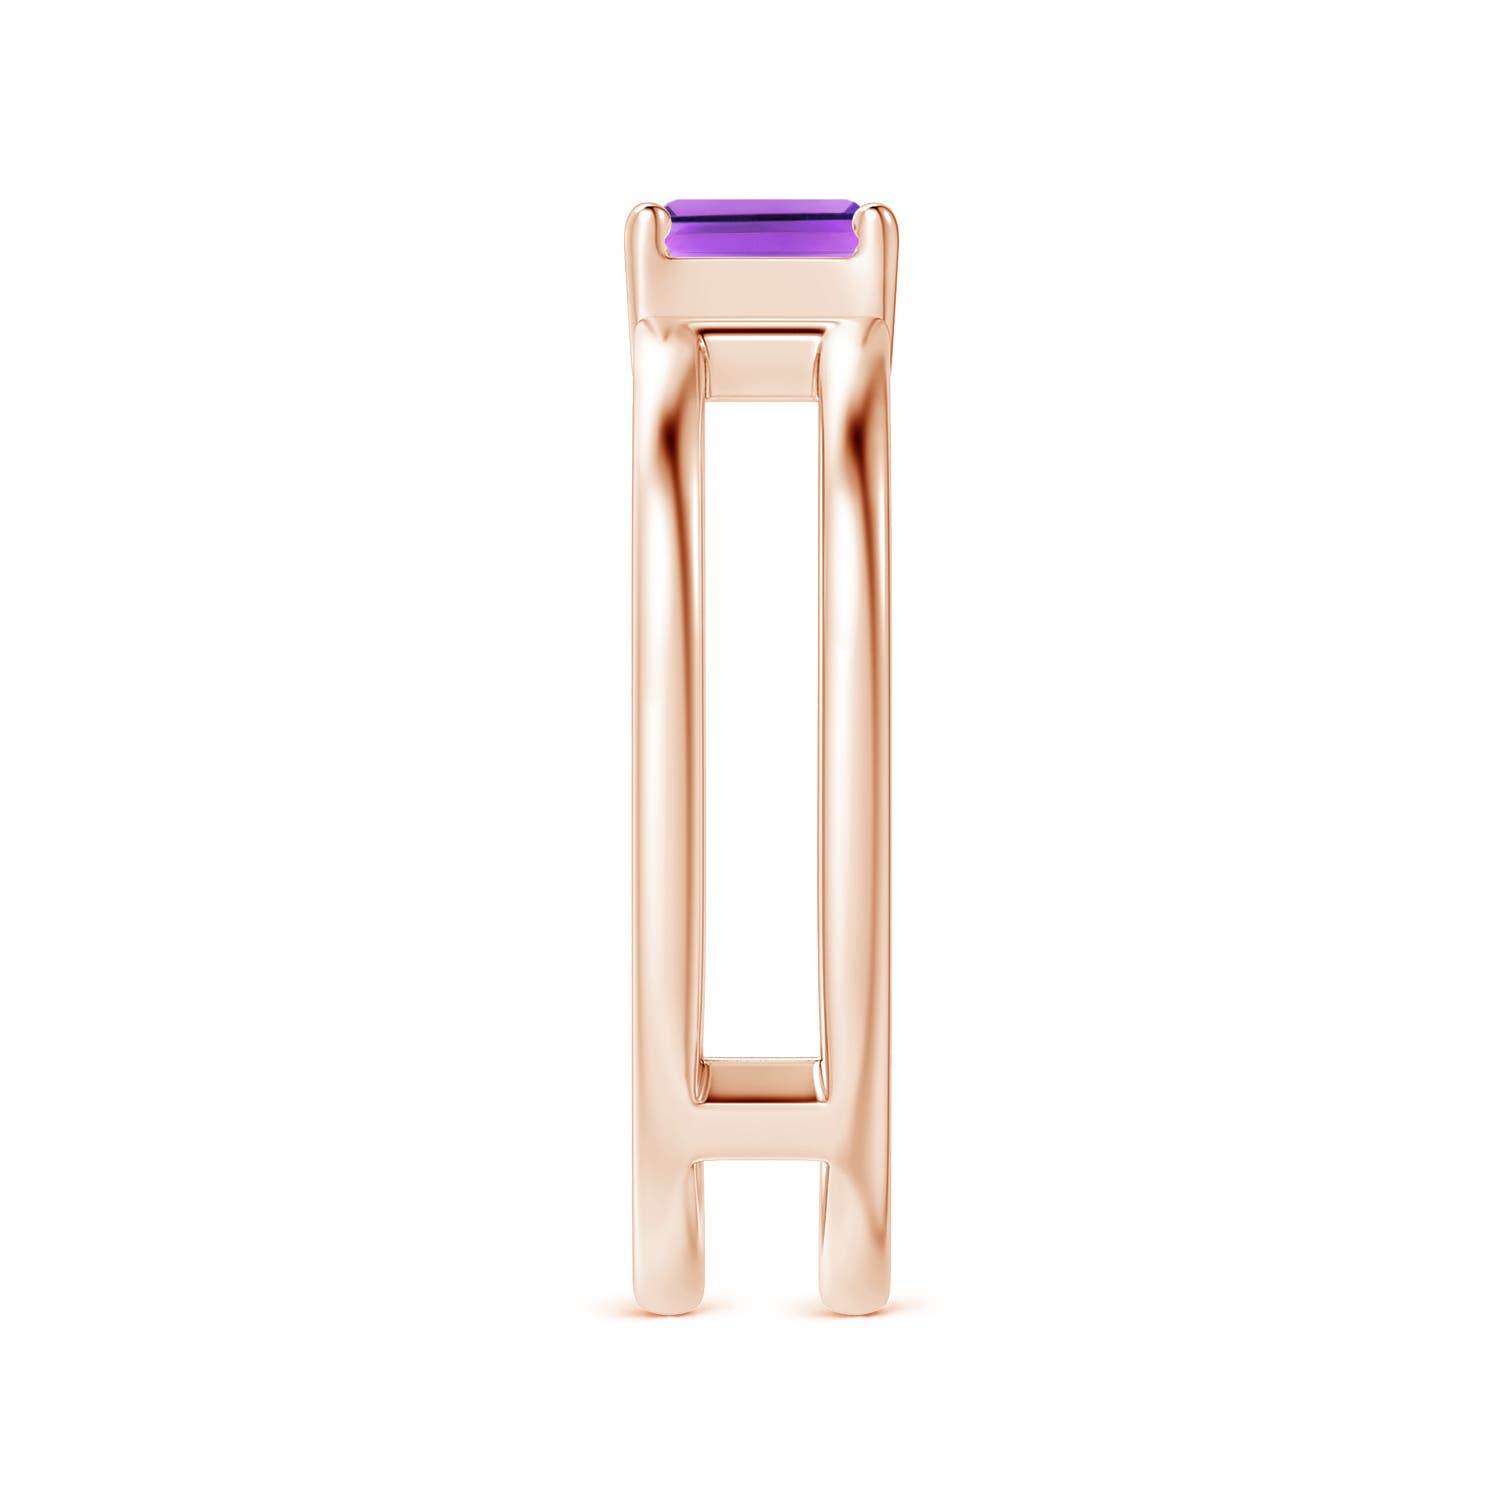 AA - Amethyst / 0.7 CT / 14 KT Rose Gold